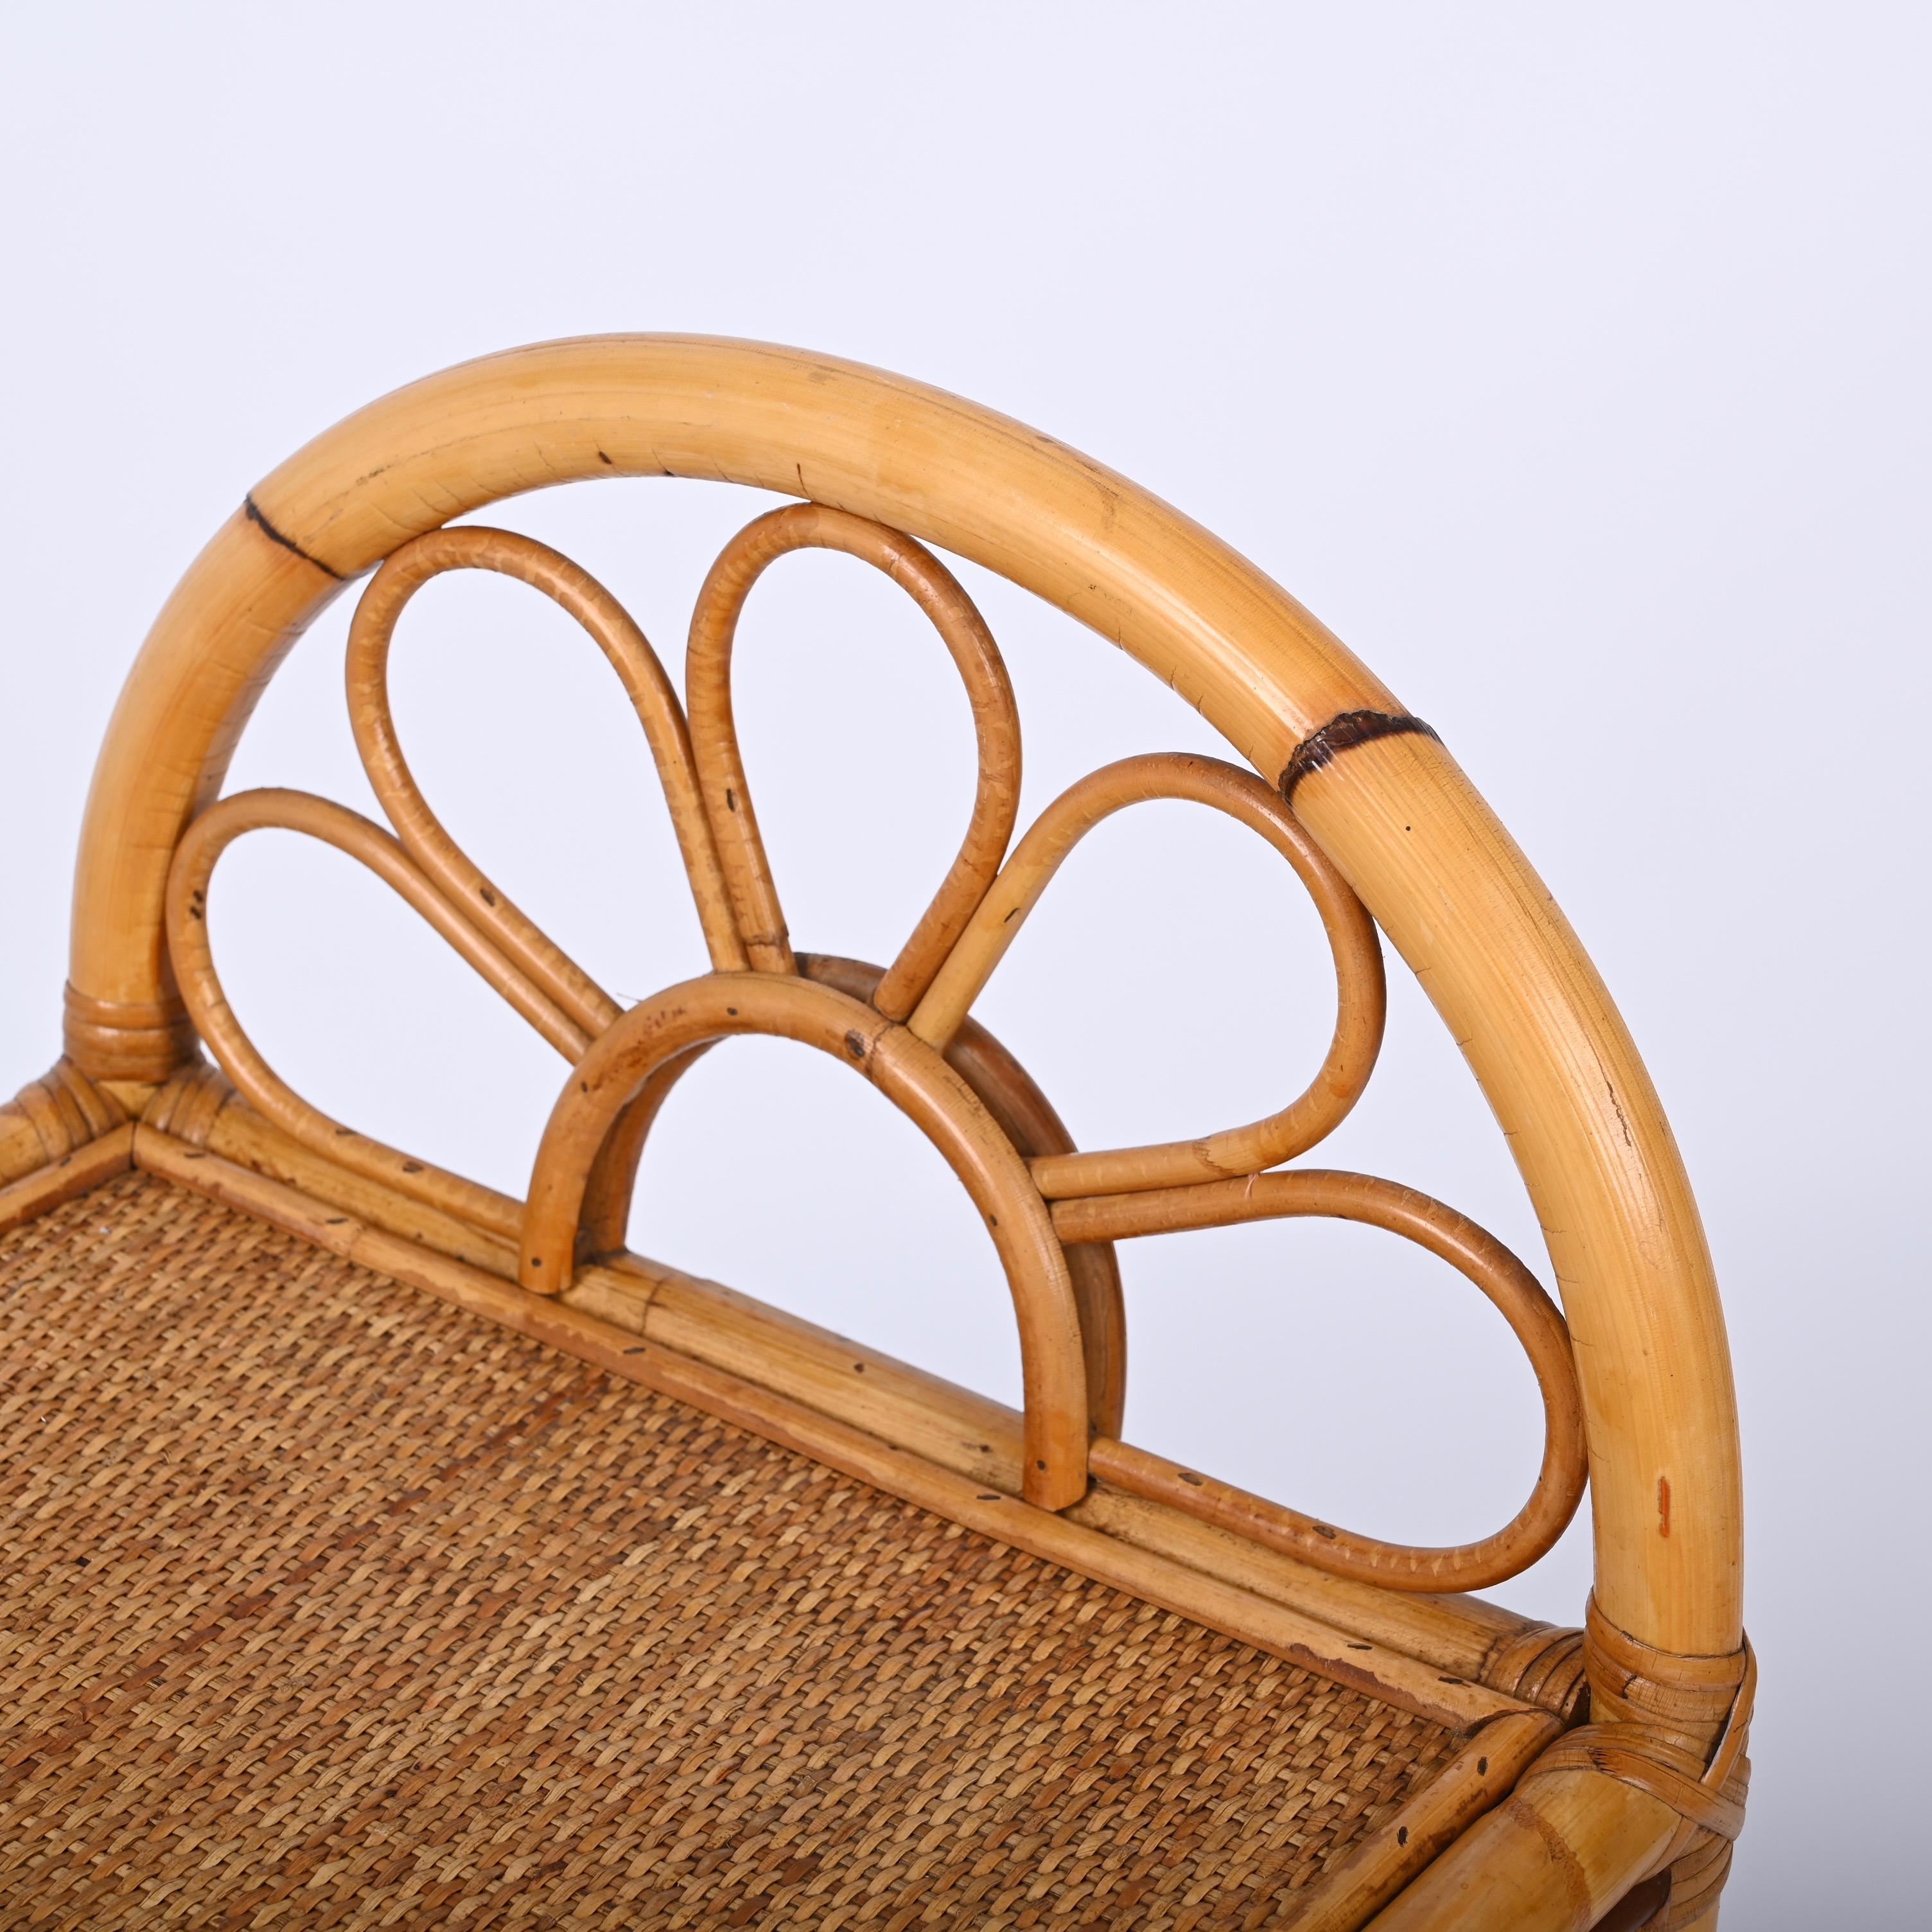 Pair of Mid-Century Modern Bamboo Cane and Rattan Italian Bedside Tables, 1970s 10